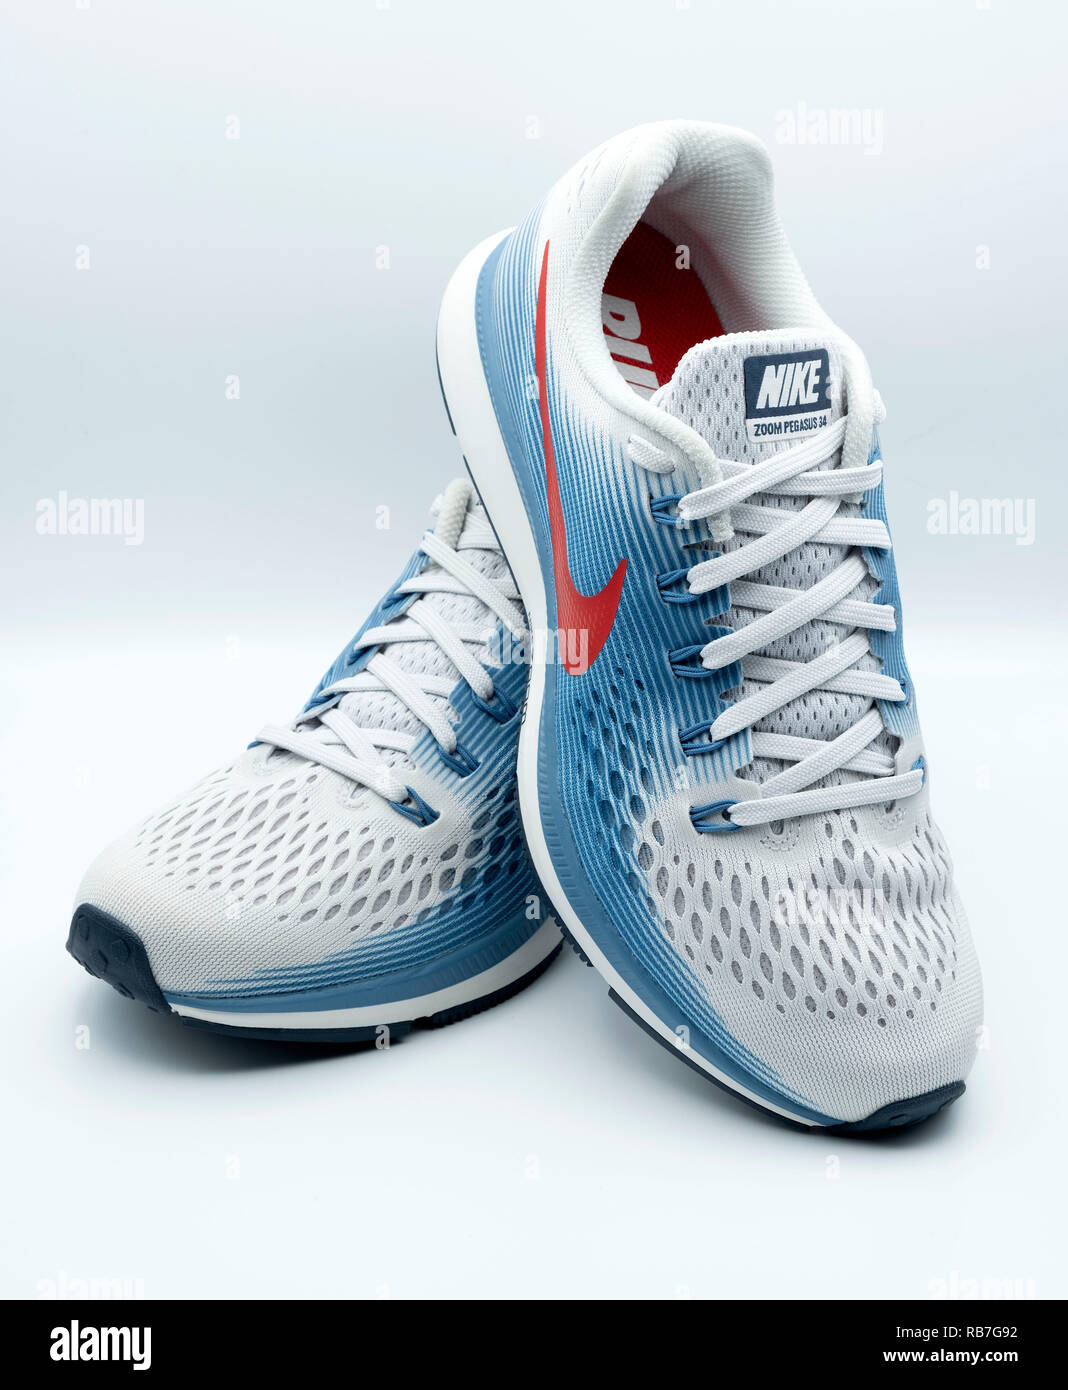 Nike Footwear High Resolution Stock Photography and Images - Alamy